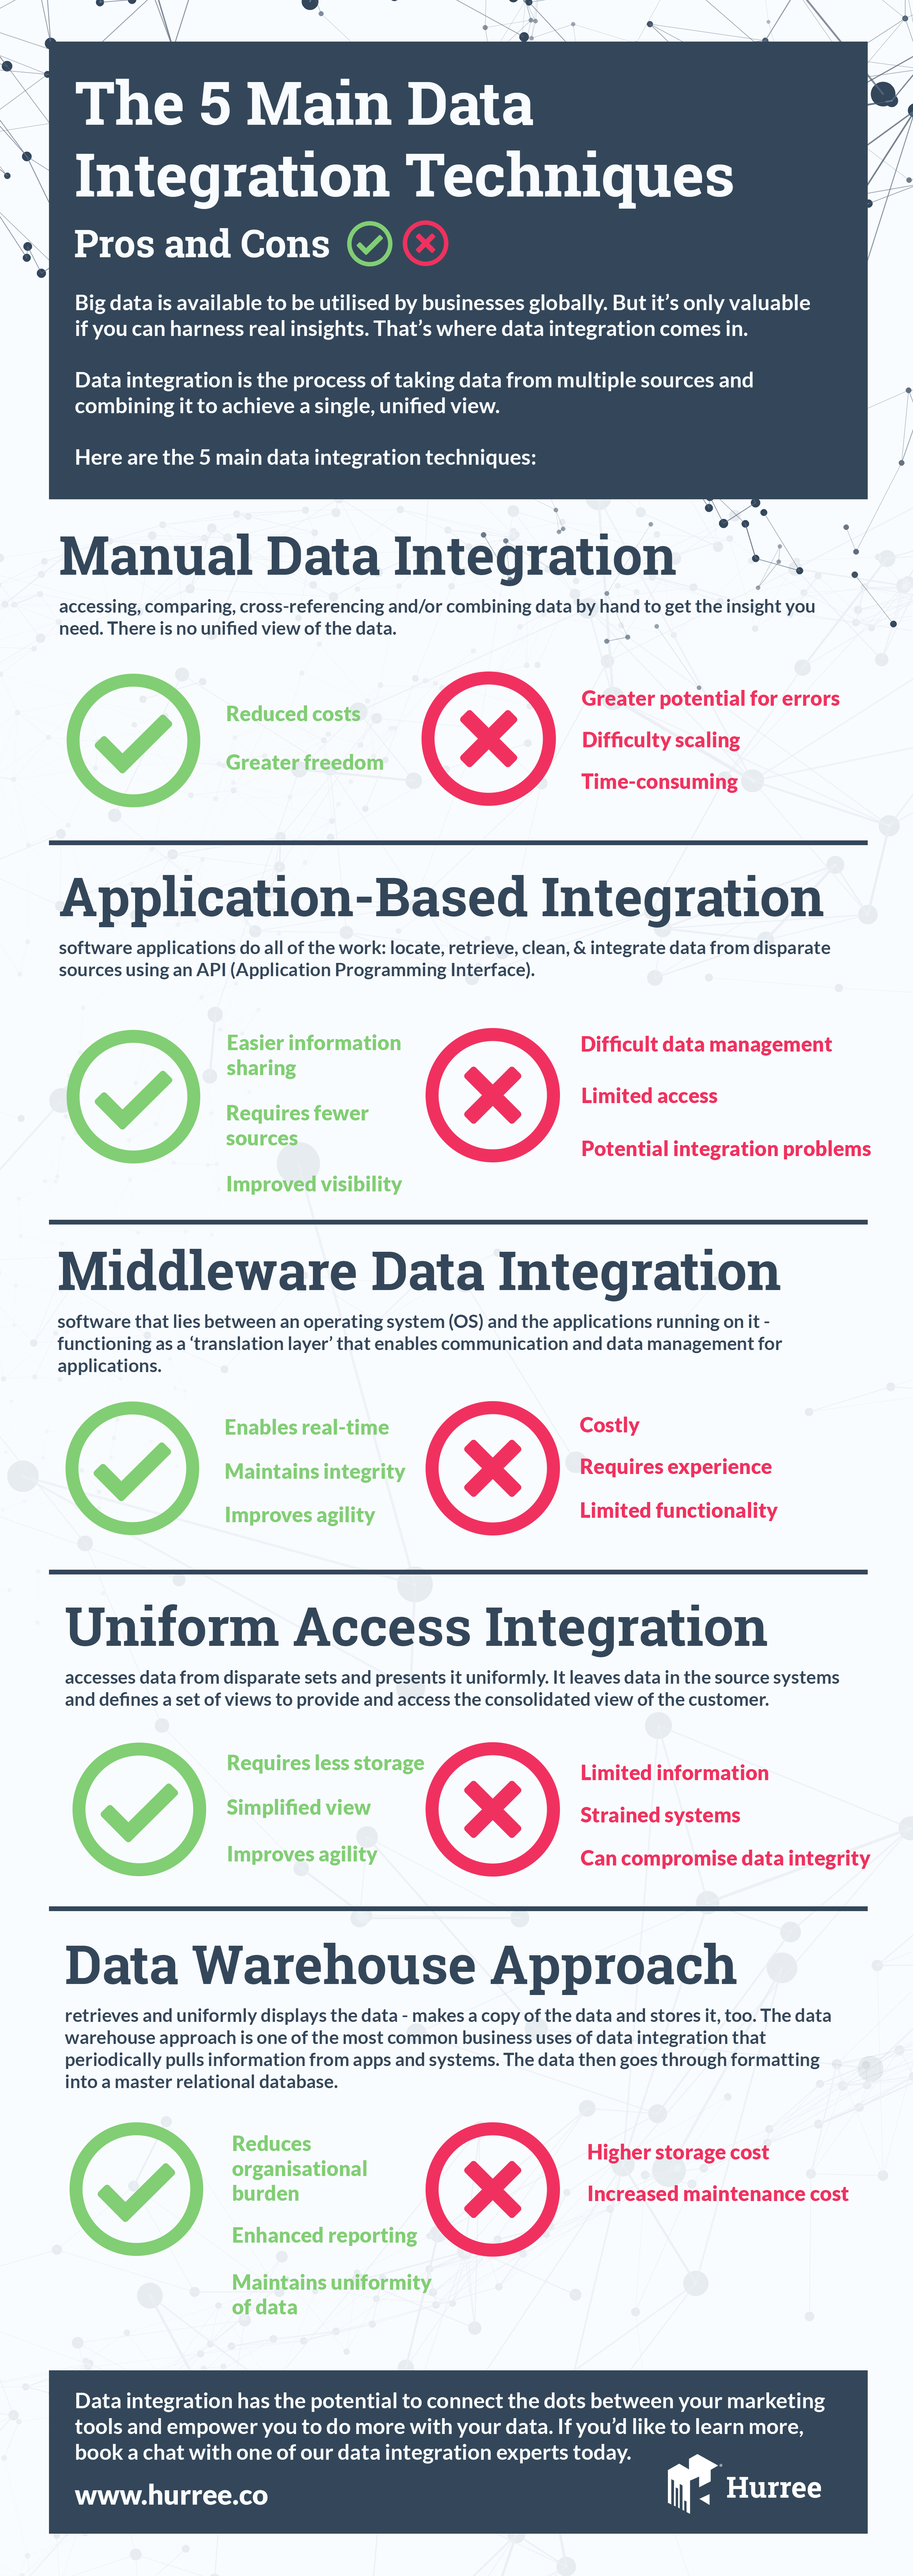 The 5 Main Data Integration Techniques: Pros and Cons [Infographic]